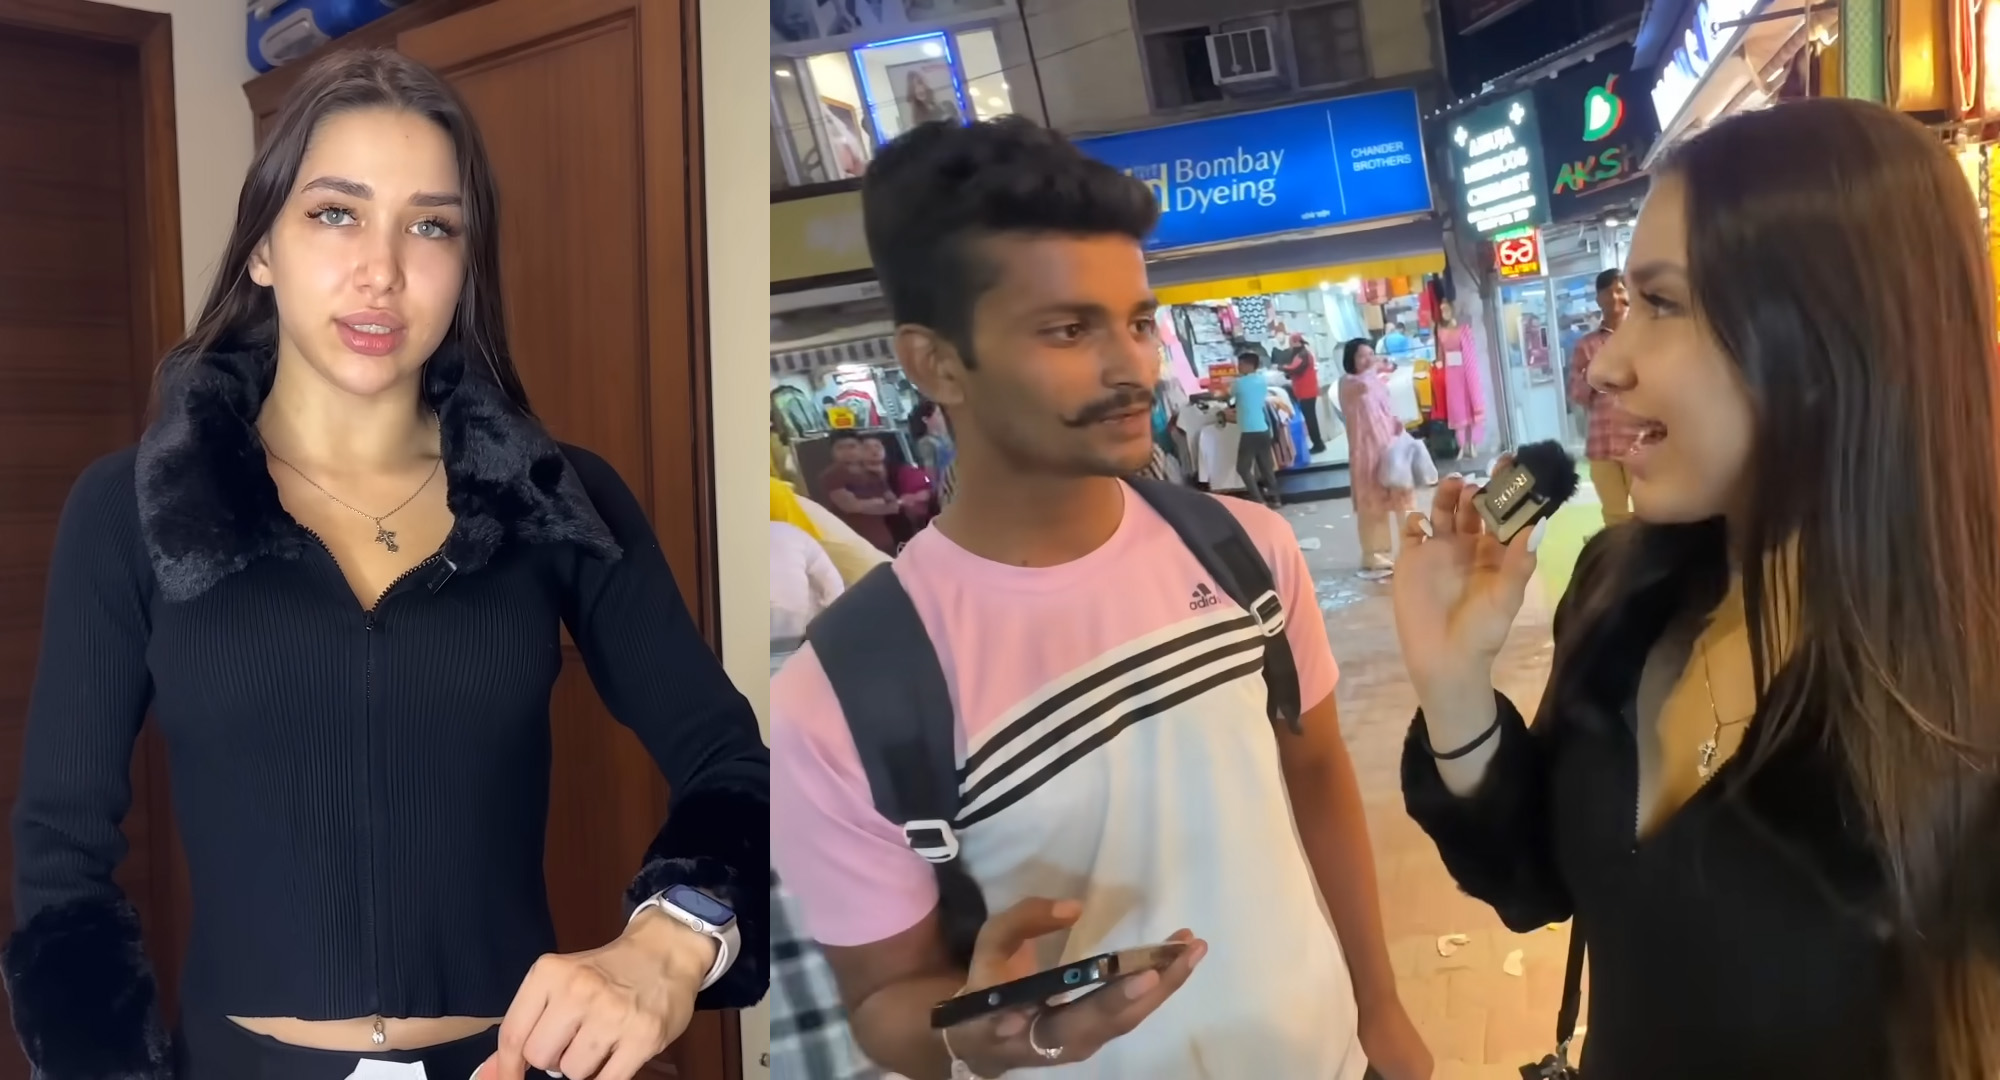 Watch video: Russian YouTuber harassed while vlogging in Delhi